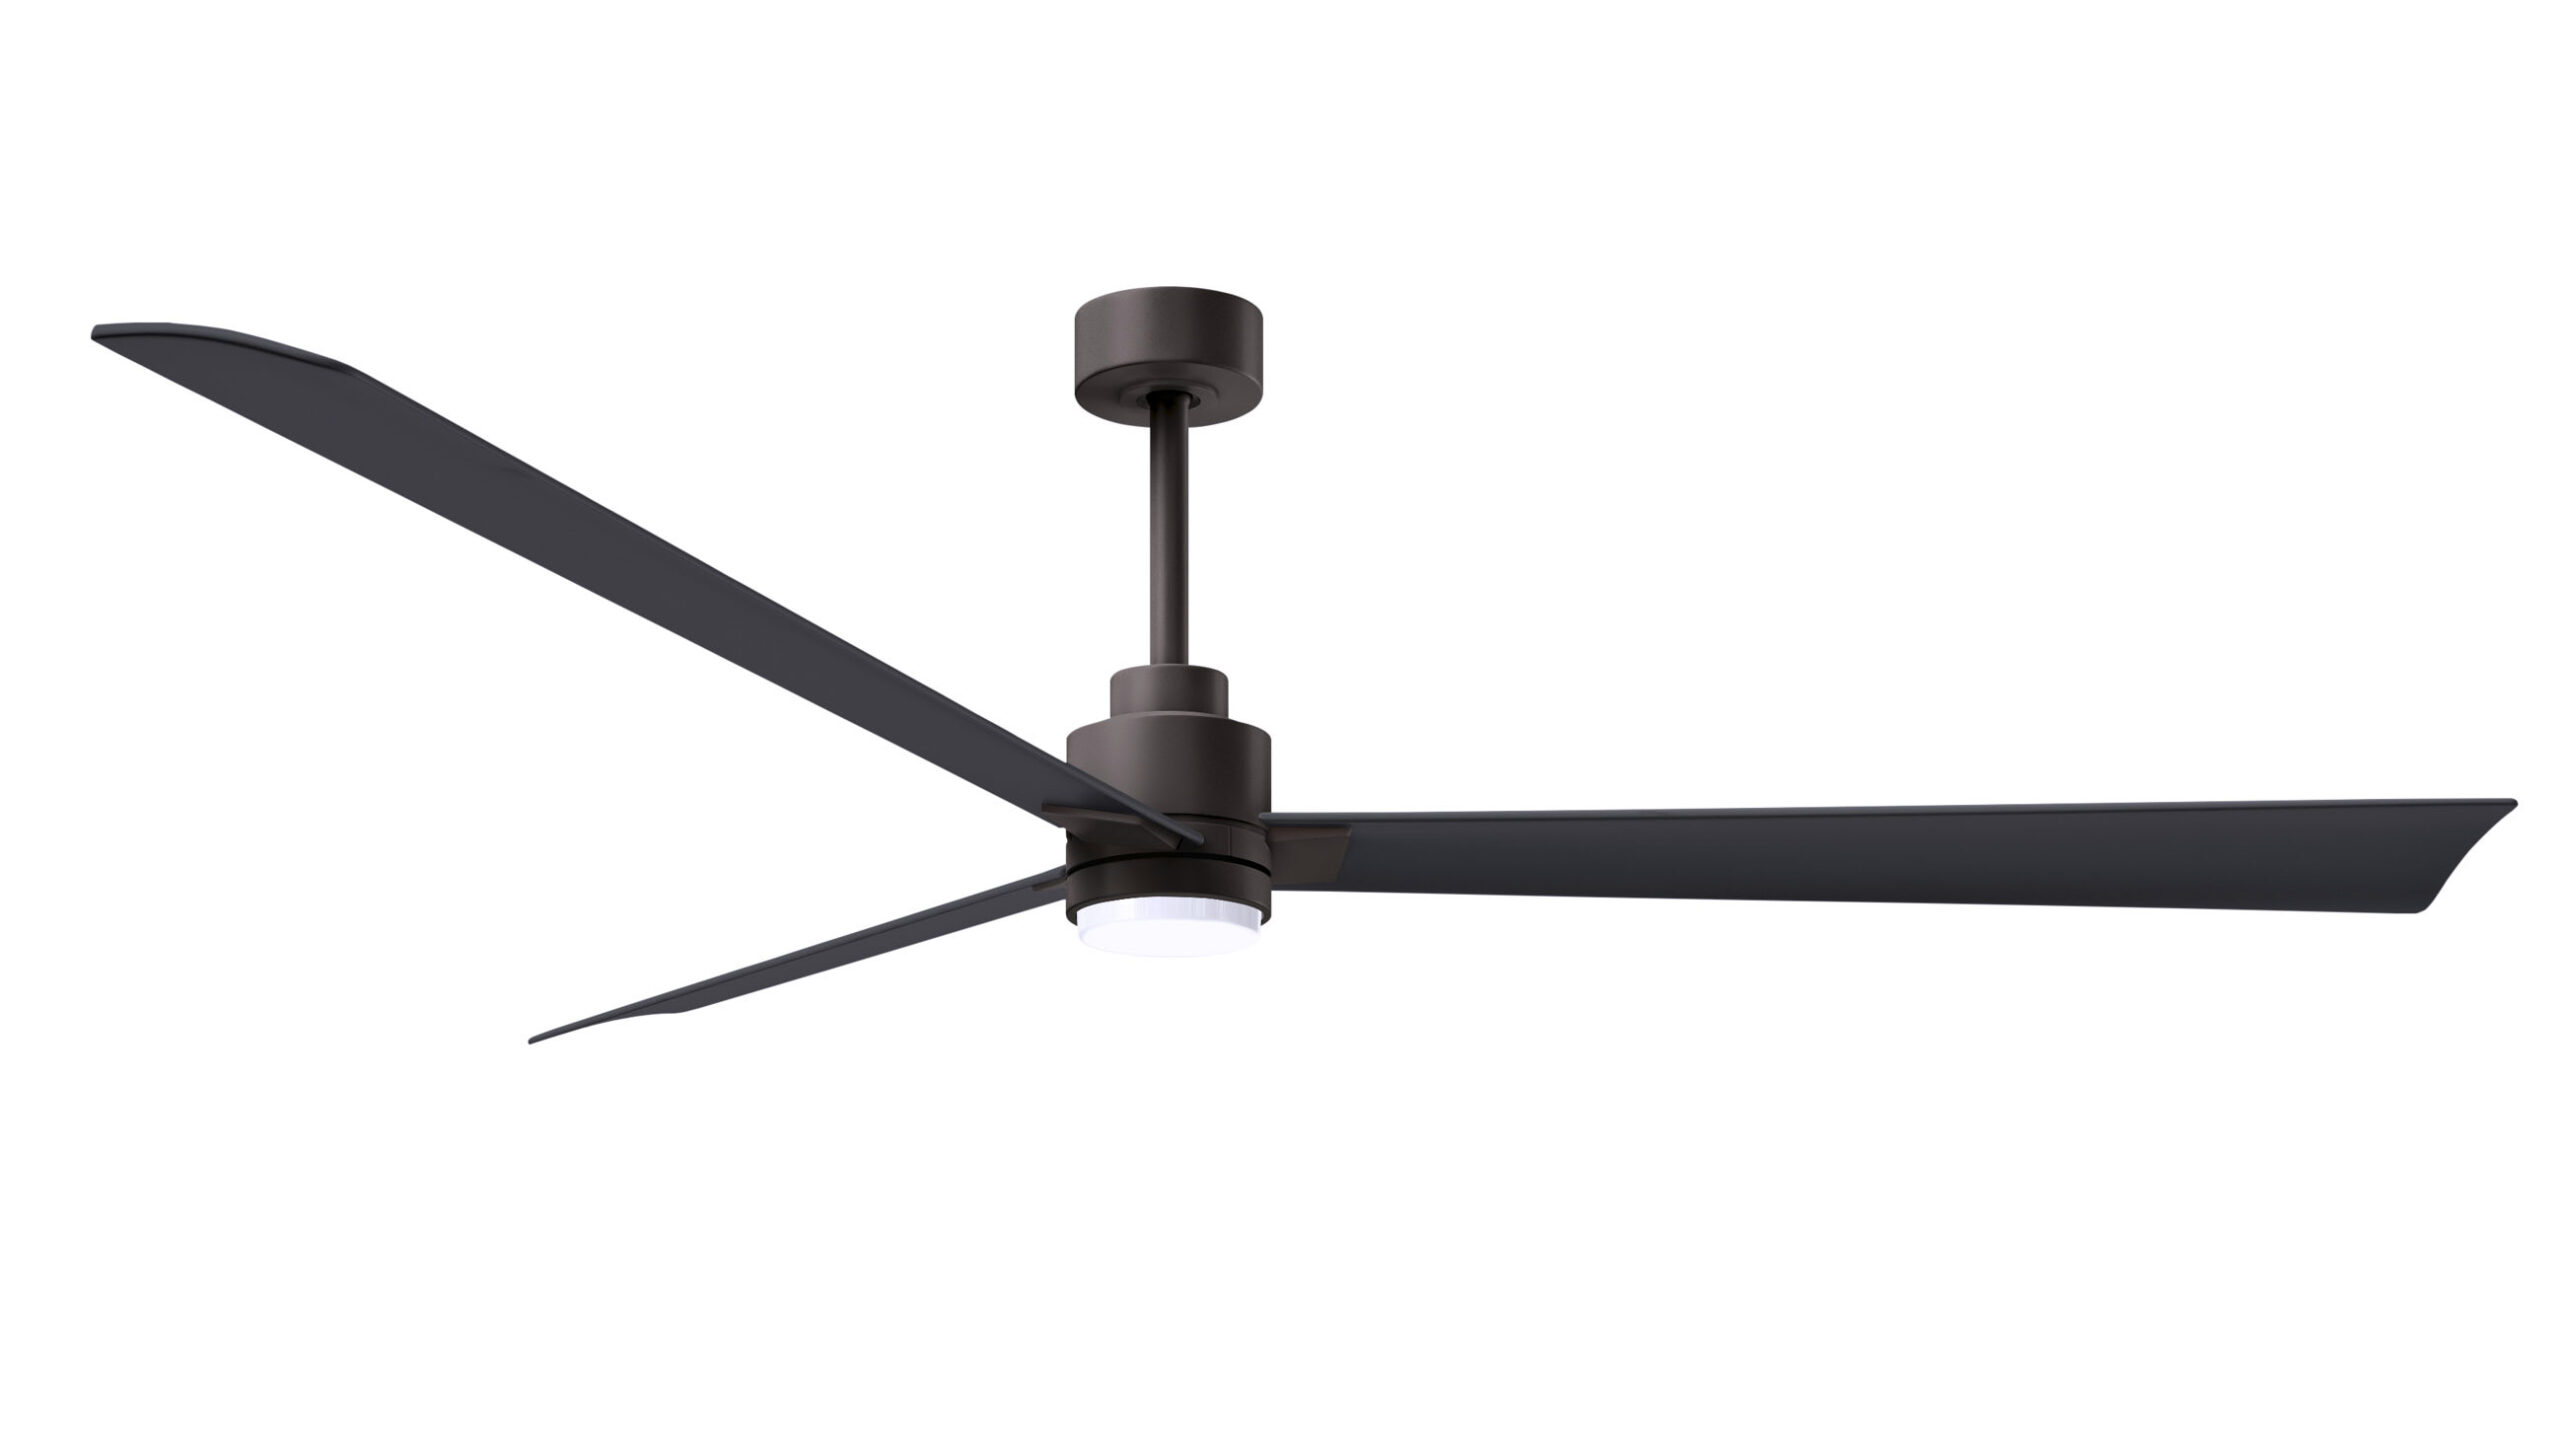 Alessandra-LK ceiling fan in textured bronze finish with 72